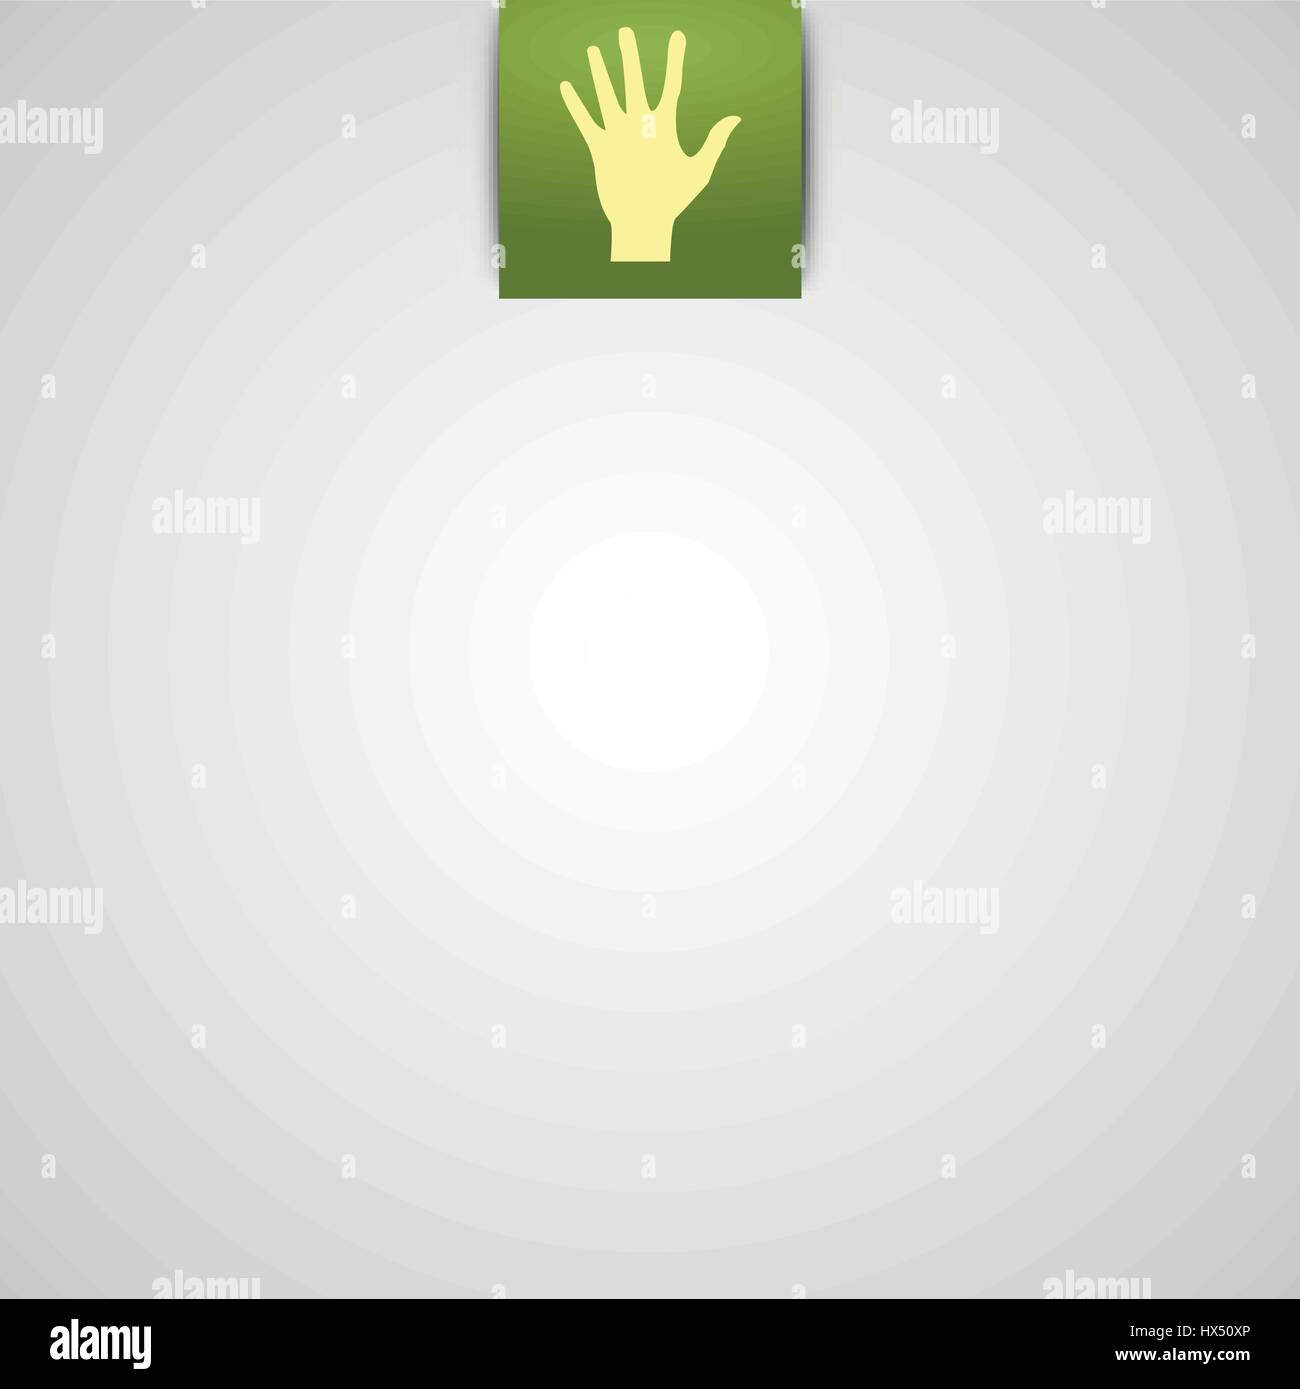 Simple vector gray background with hand icon Stock Vector